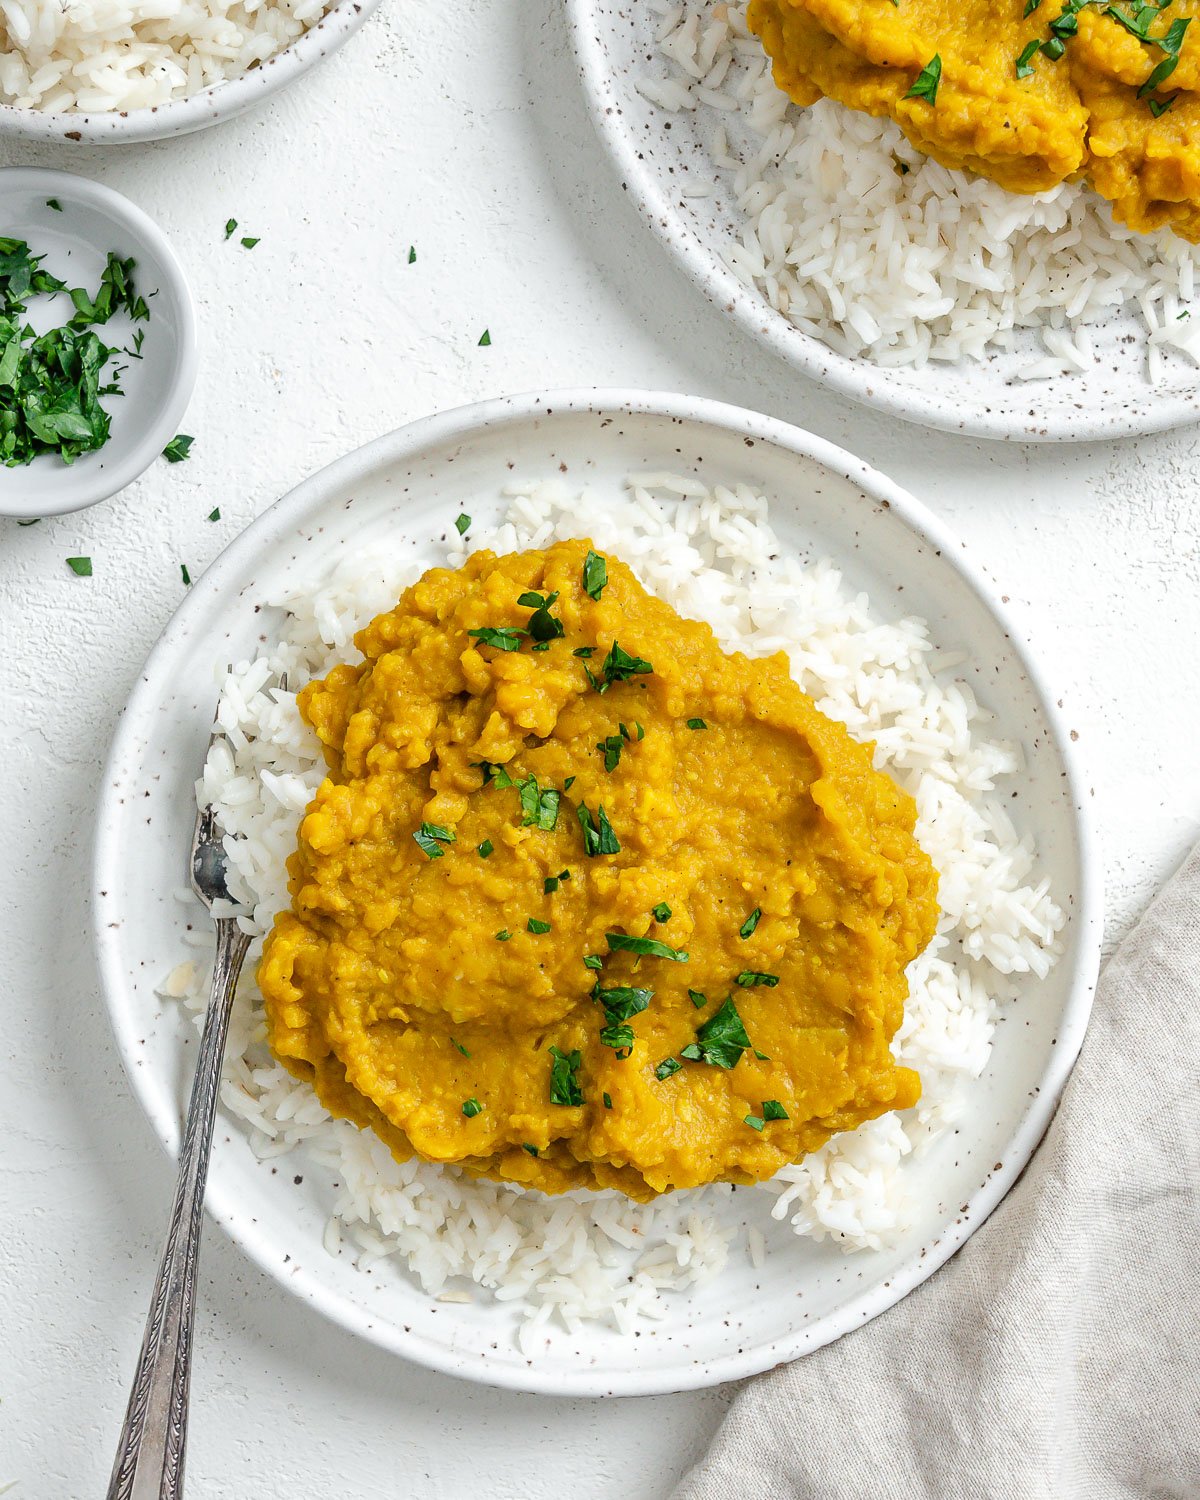 completed Easy Yellow Dal on rice in a white plate against a light background